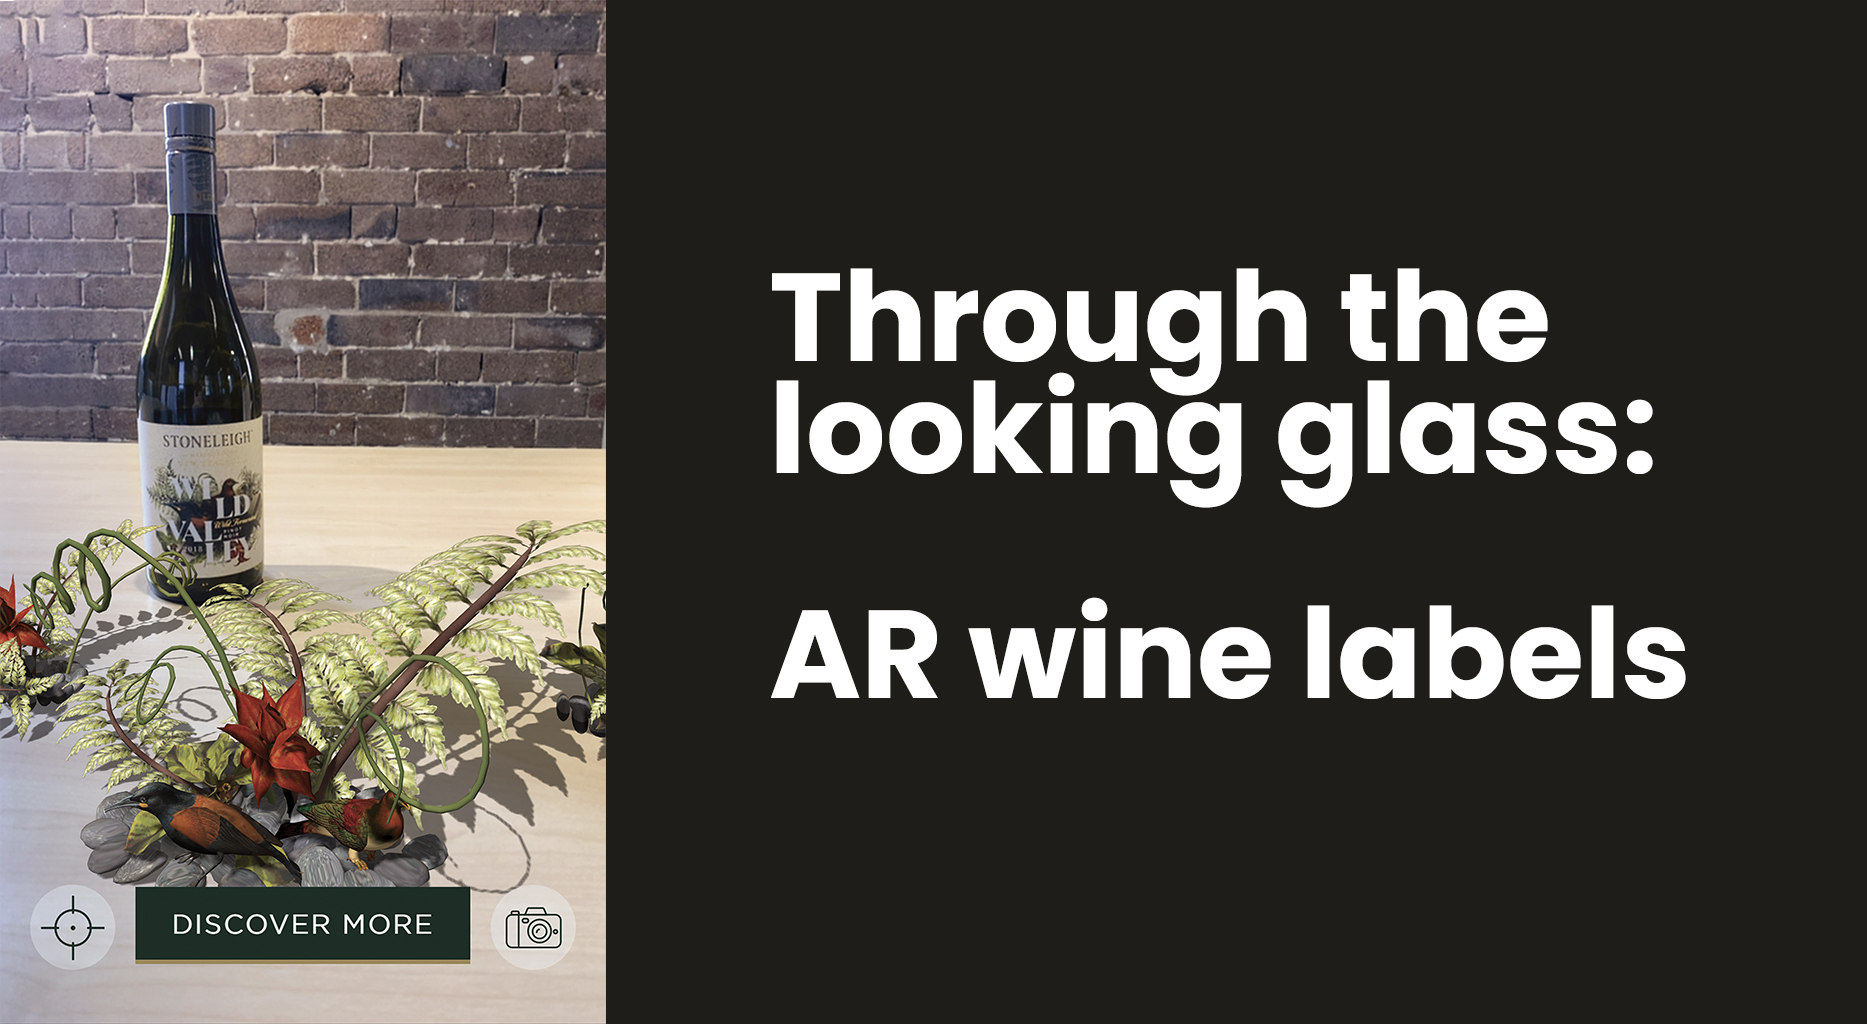 Through the looking glass: AR wine labels